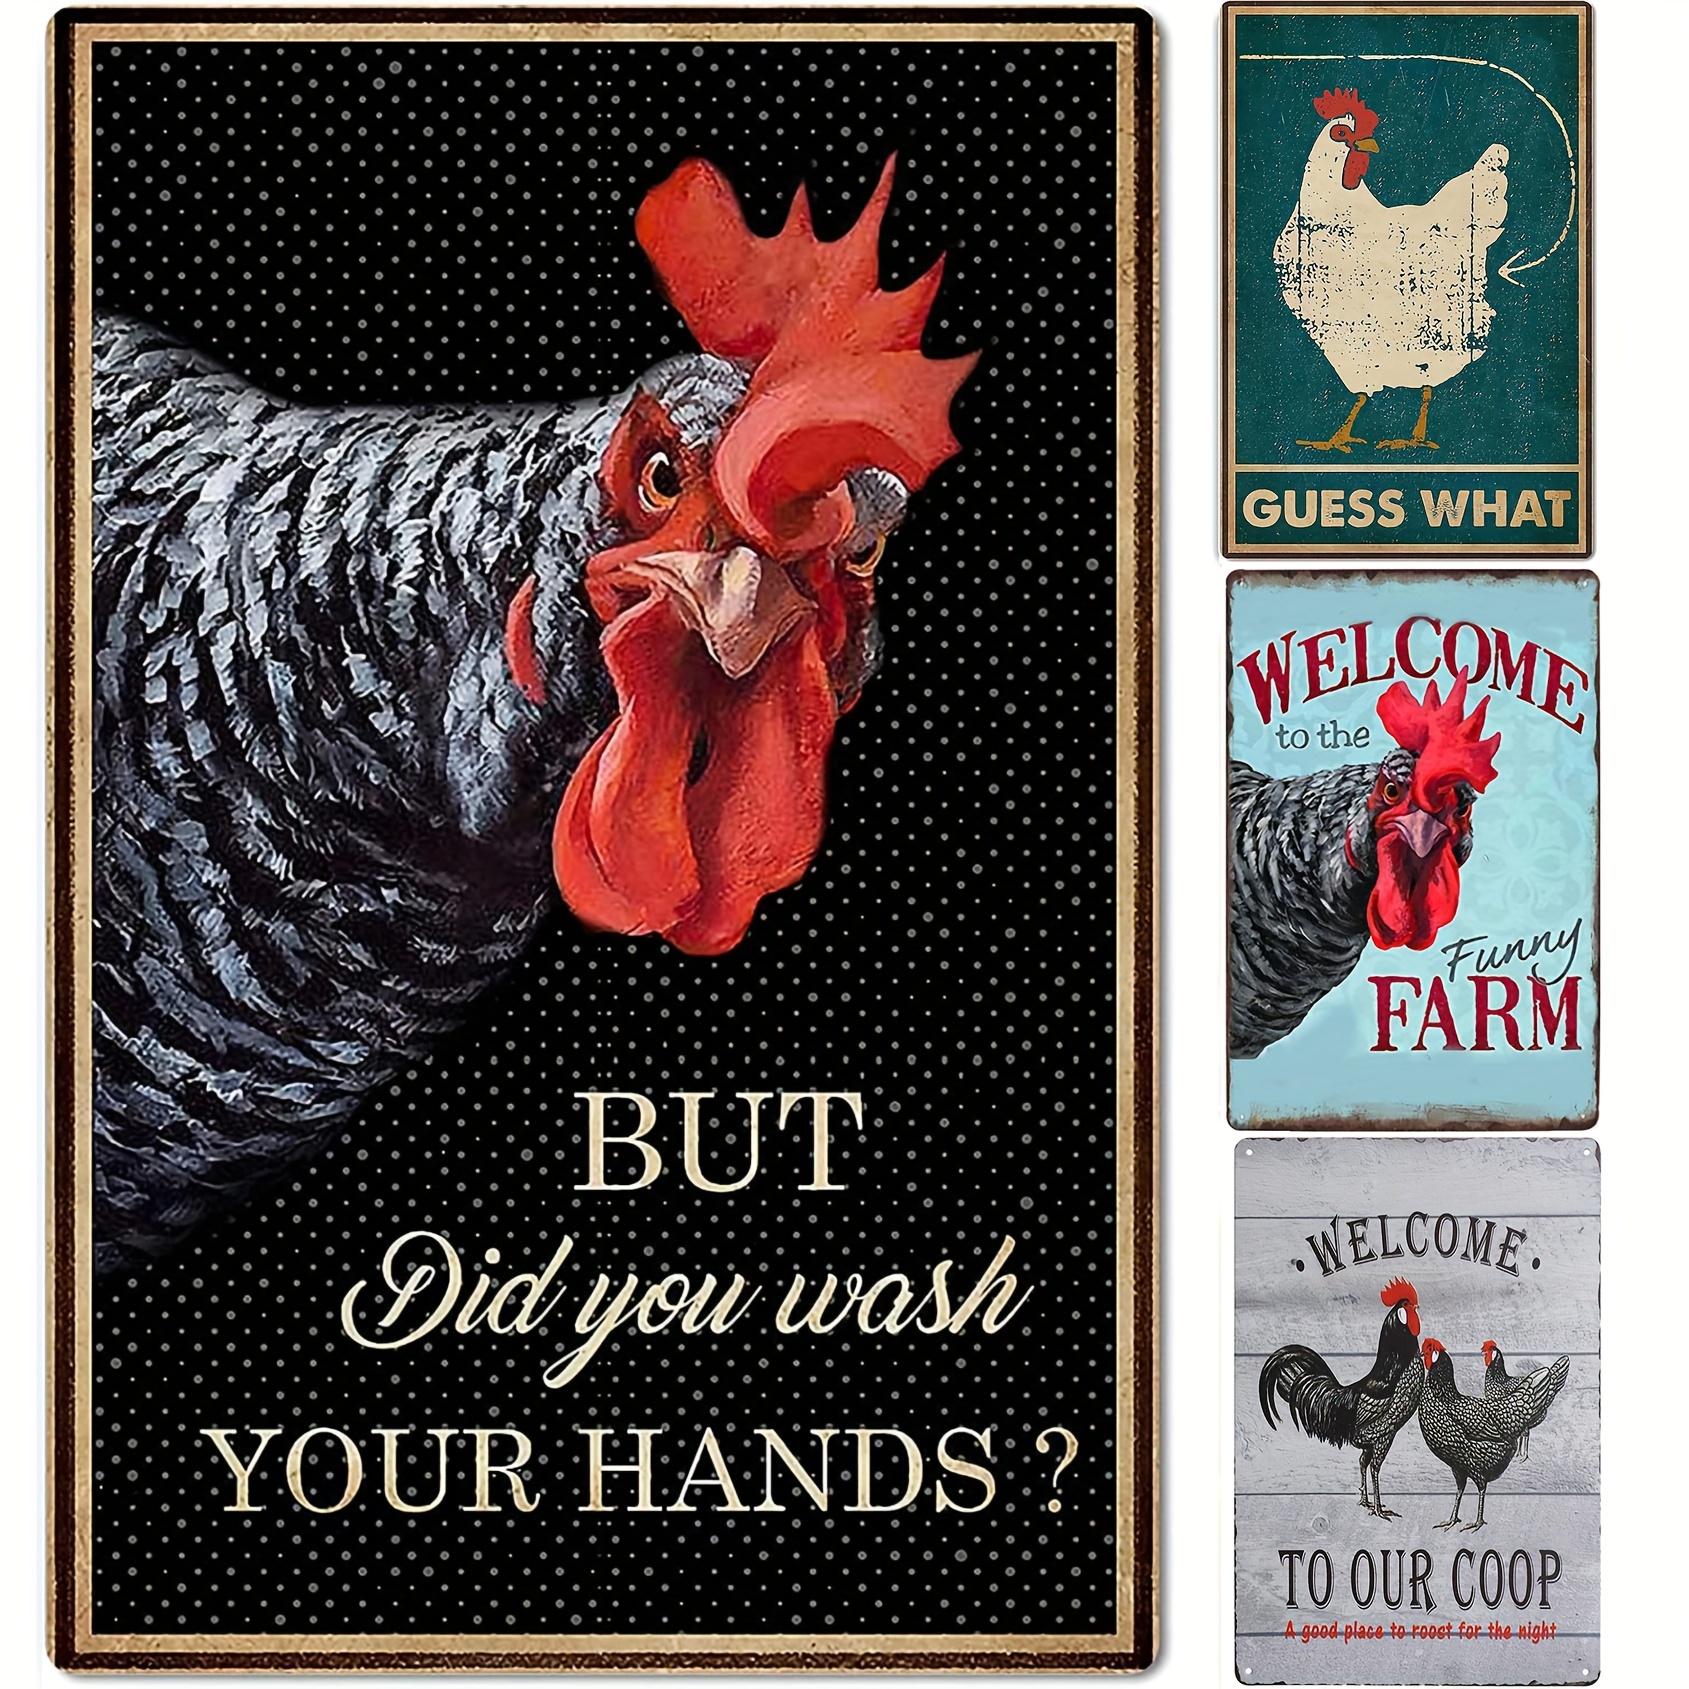 Cute Educational Chicken Knowledge Breeds of Chickens Chart Vintage Metal  Tin Sign For Farm Club Cafe Bar Home Kitchen Wall Decoration 12 x 8